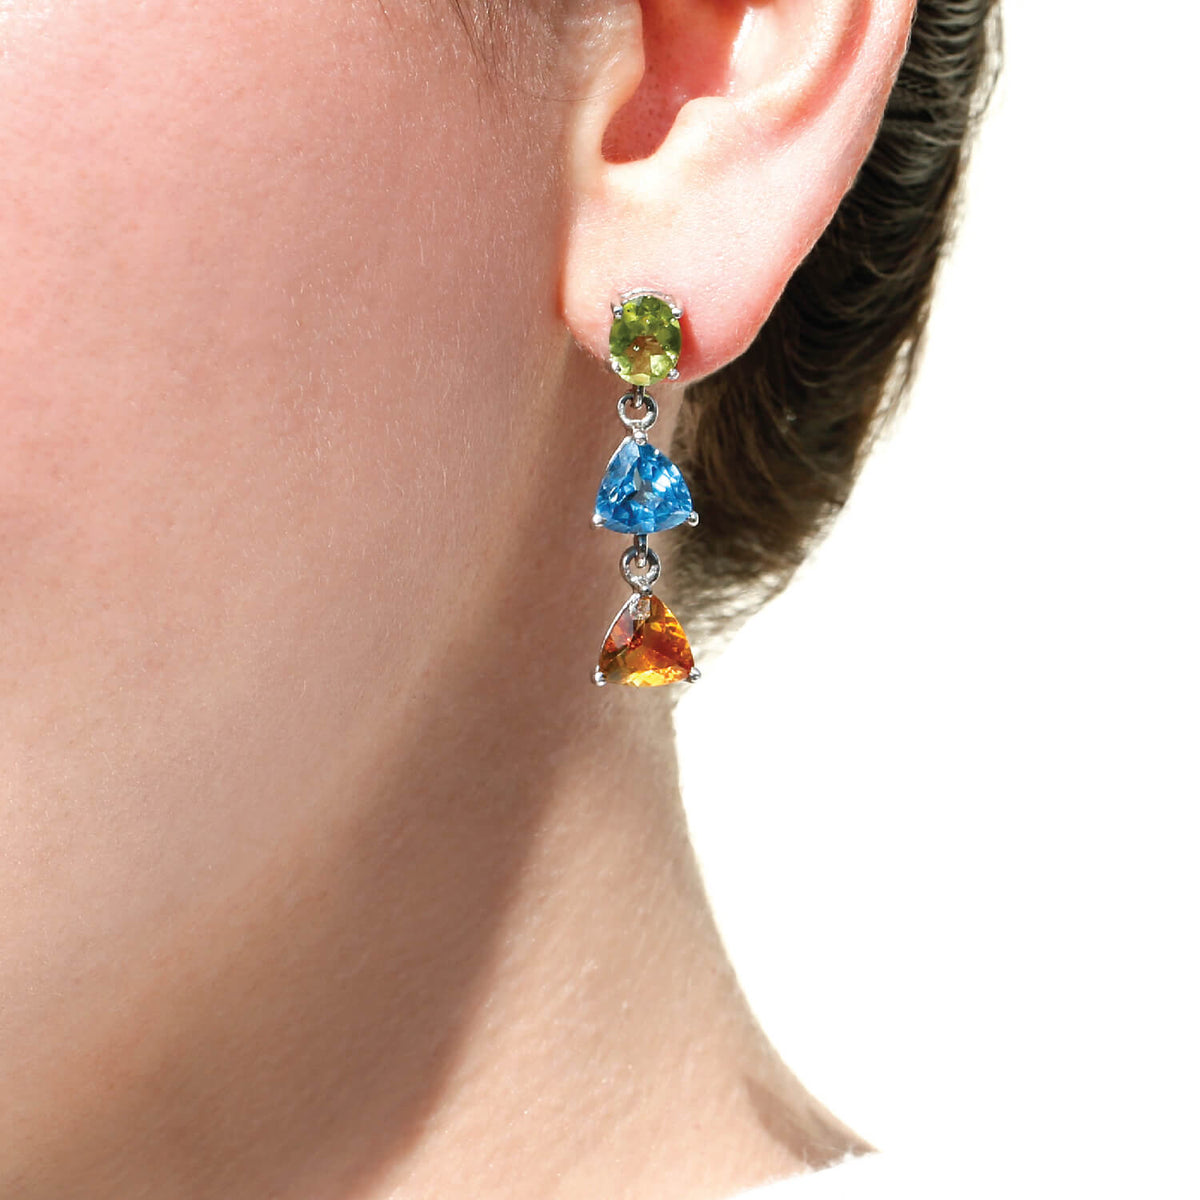 Baylor Color Stone Earrings